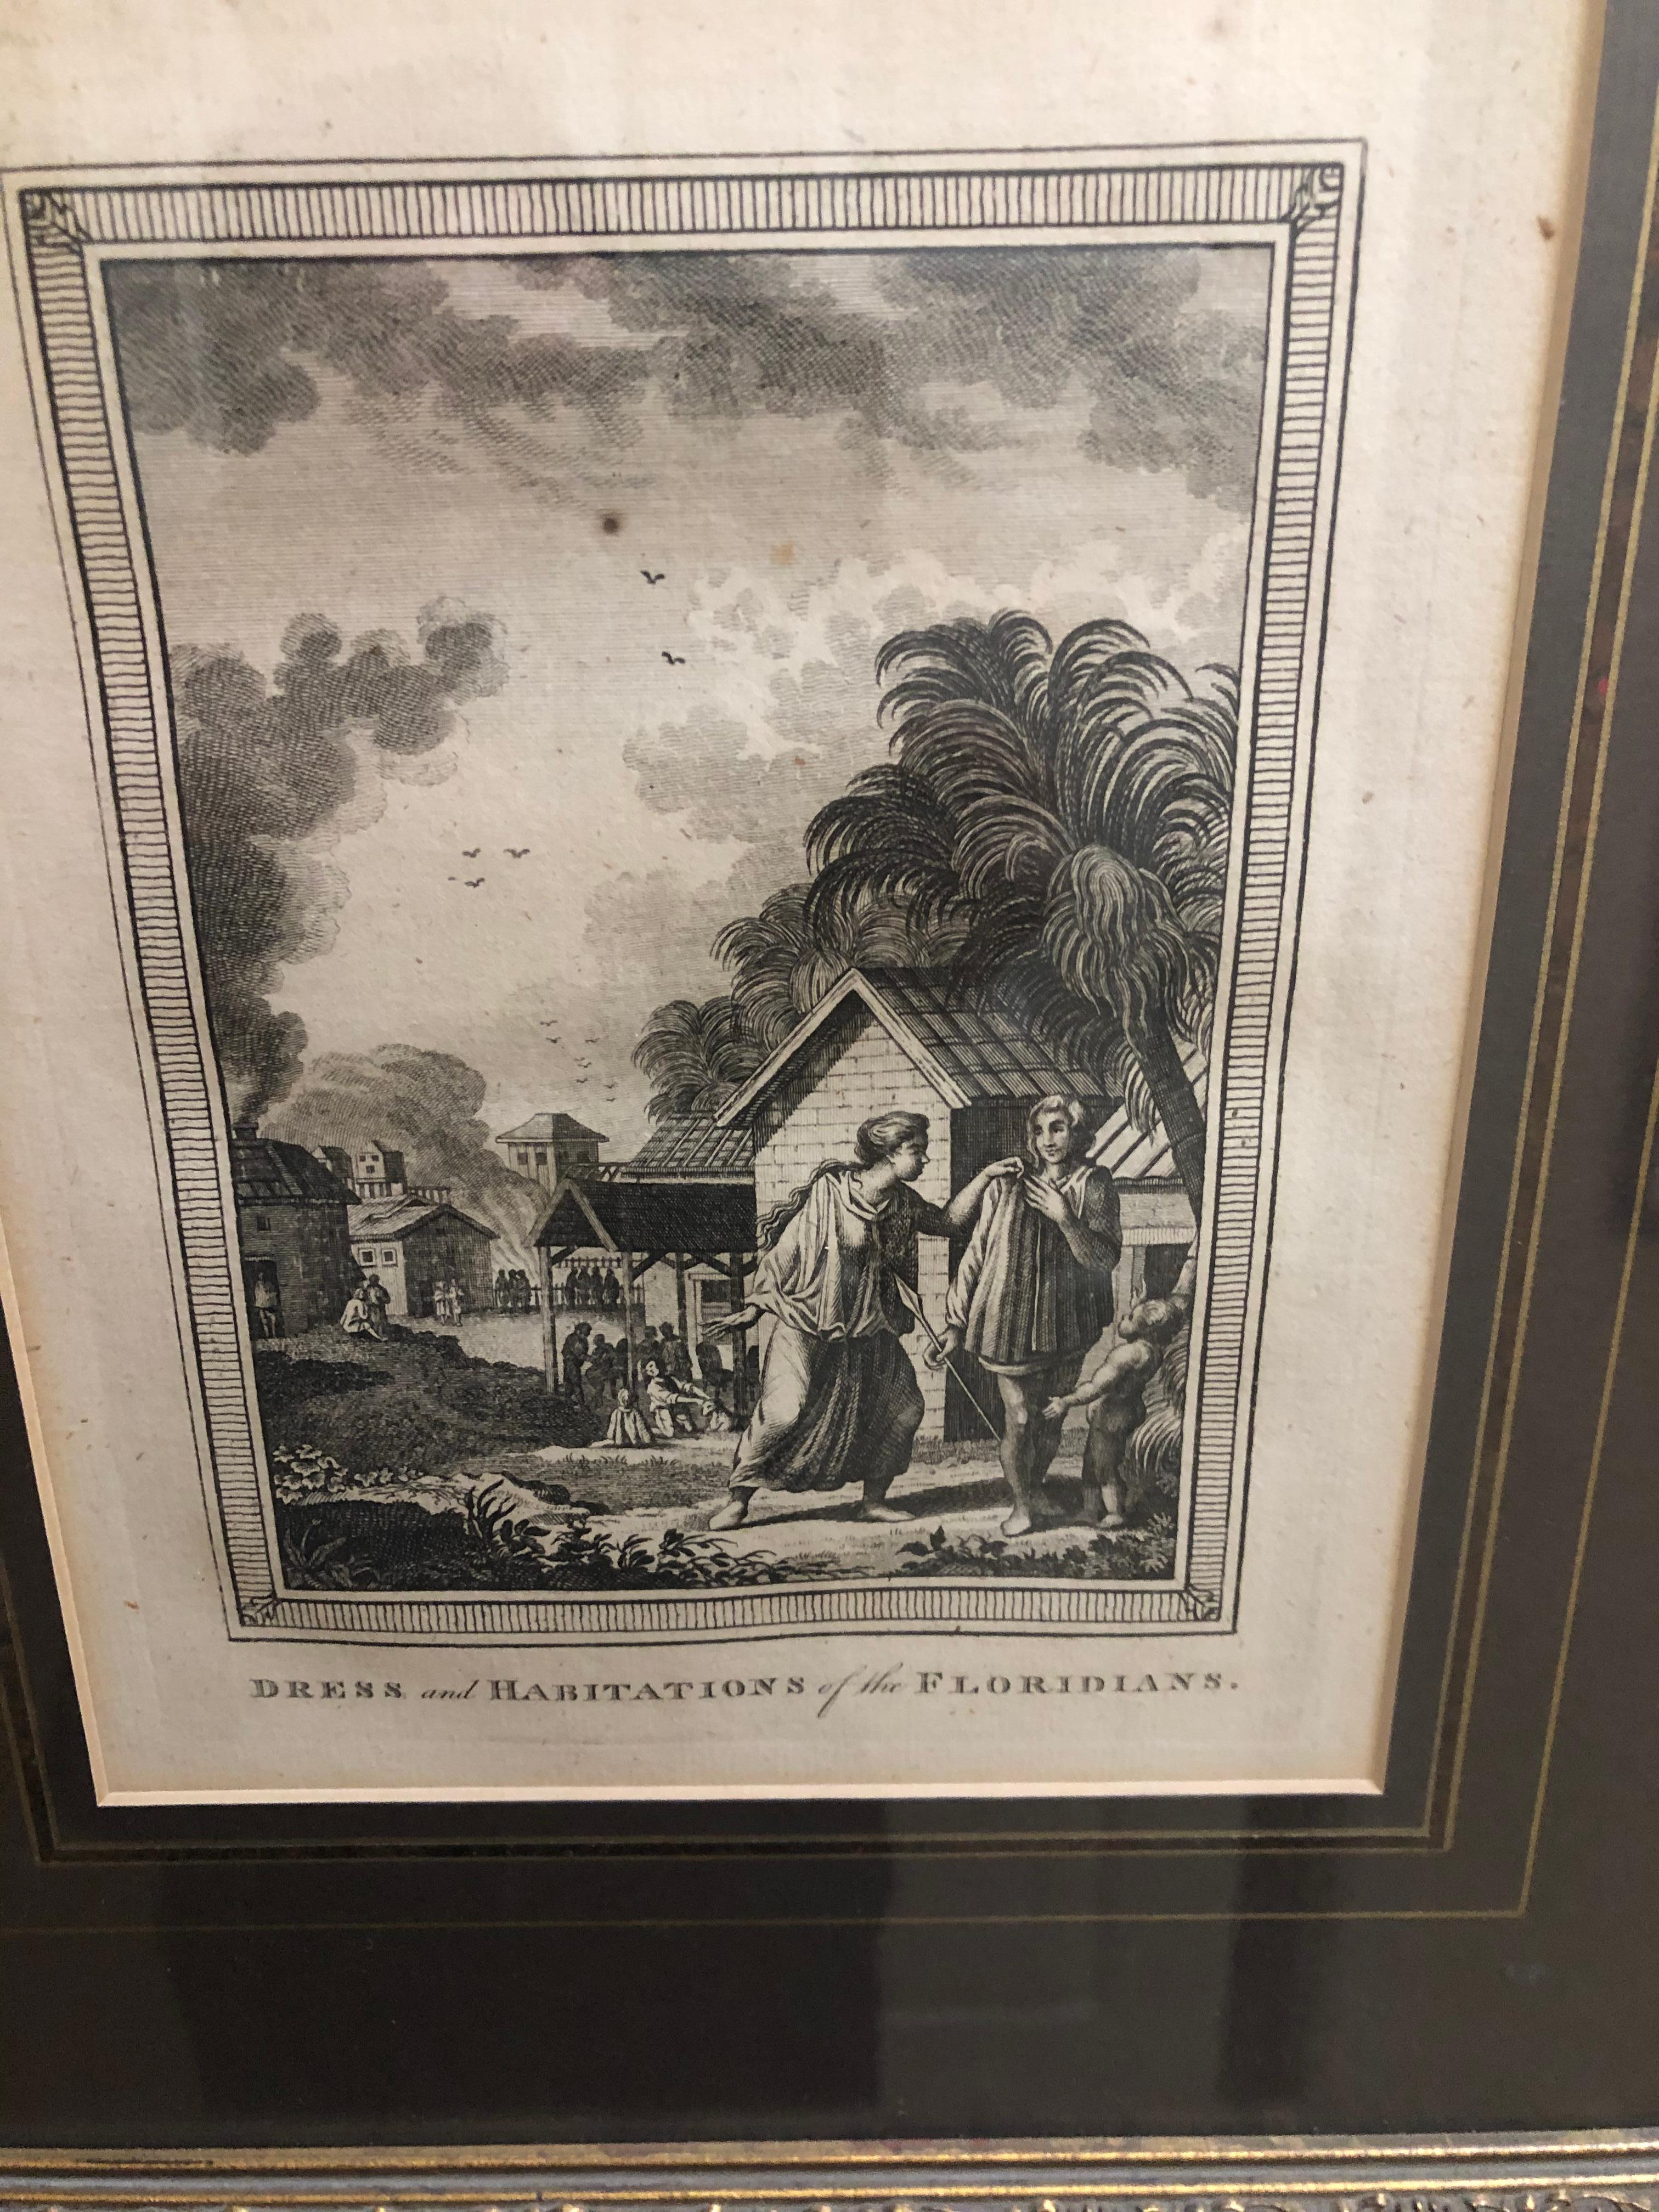 Unknown Figurative Print - 18th Century Native Floridians Etching